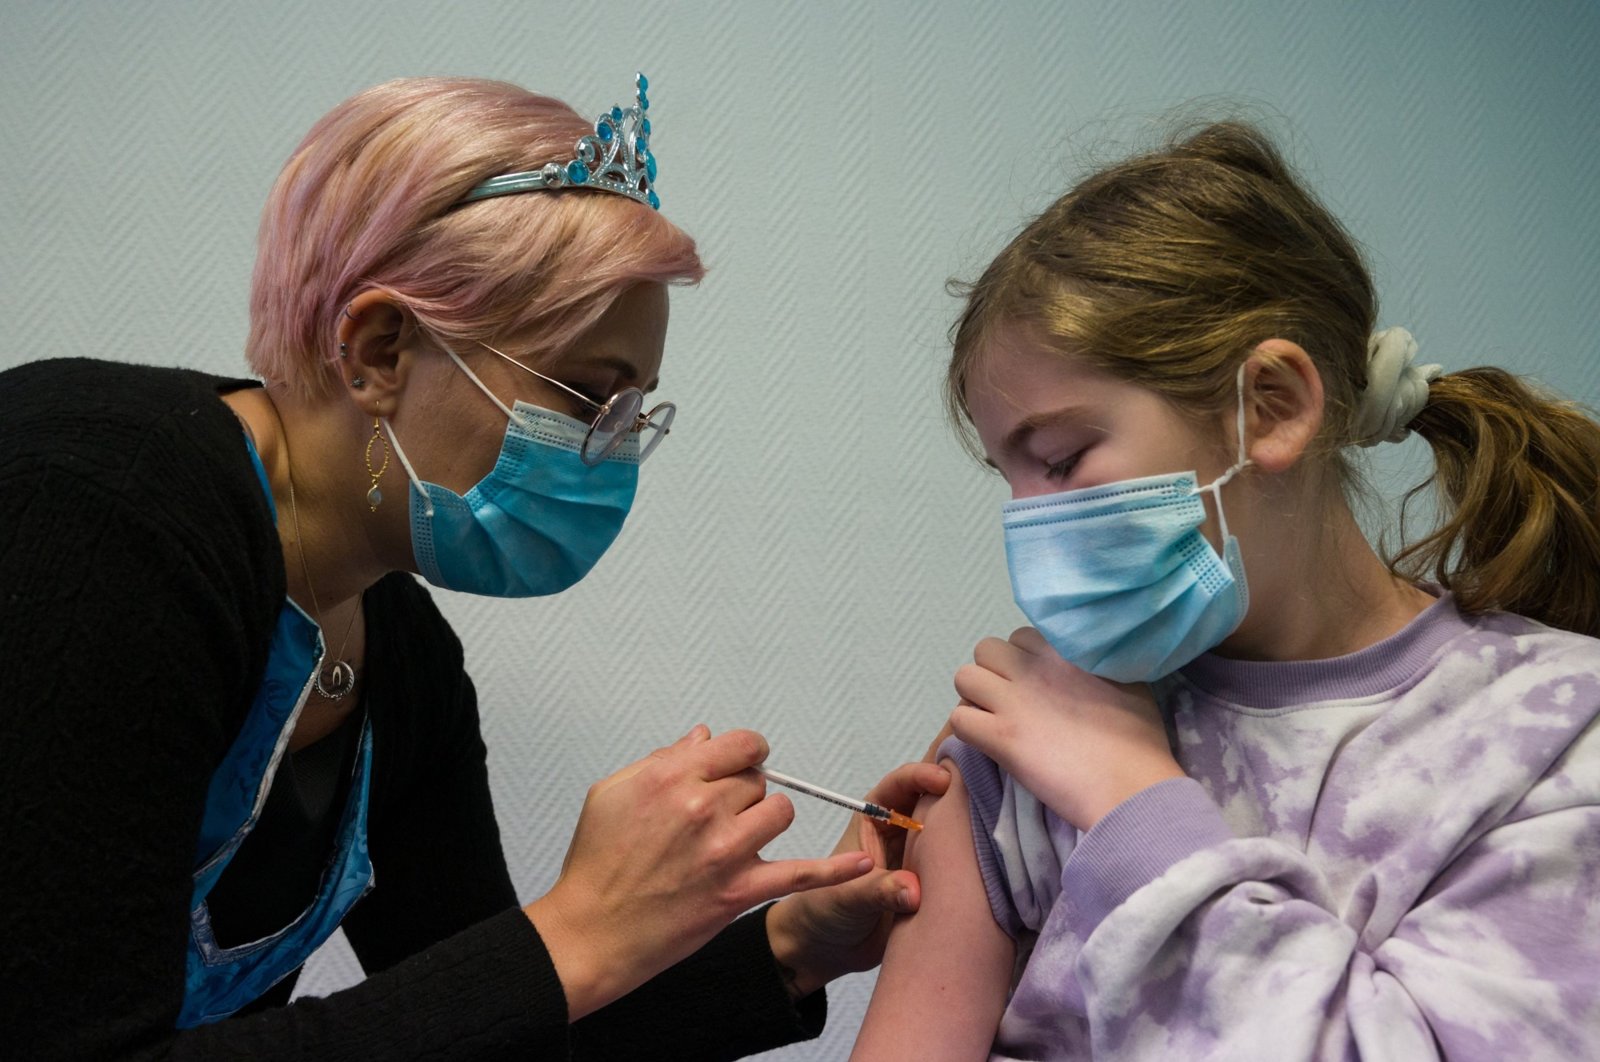 A child receives a dose of the Pfizer-BioNTech COVID-19 vaccine at the Clemenceau rehabilitation center in Strasbourg, France, Dec. 22, 2021. (AFP Photo)